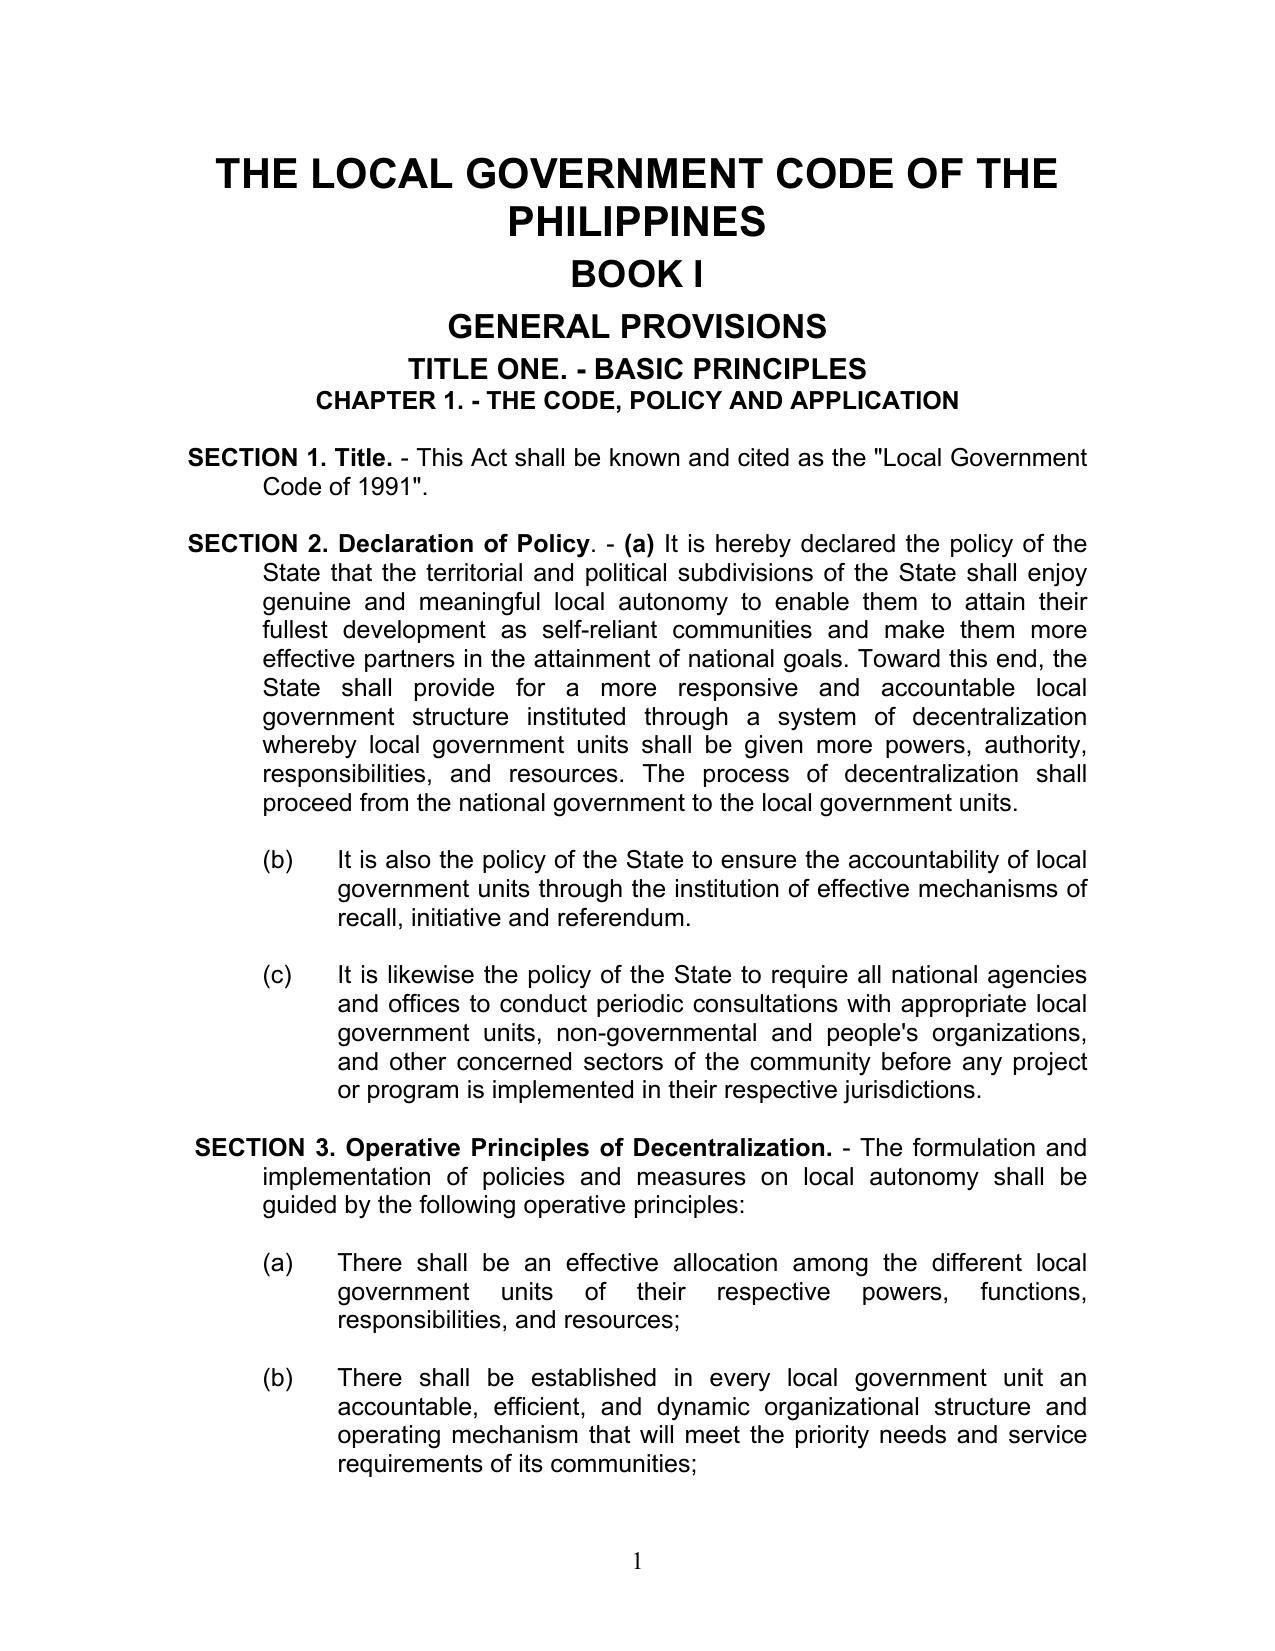 THE LOCAL GOVERNMENT CODE OF THE PHILIPPINES